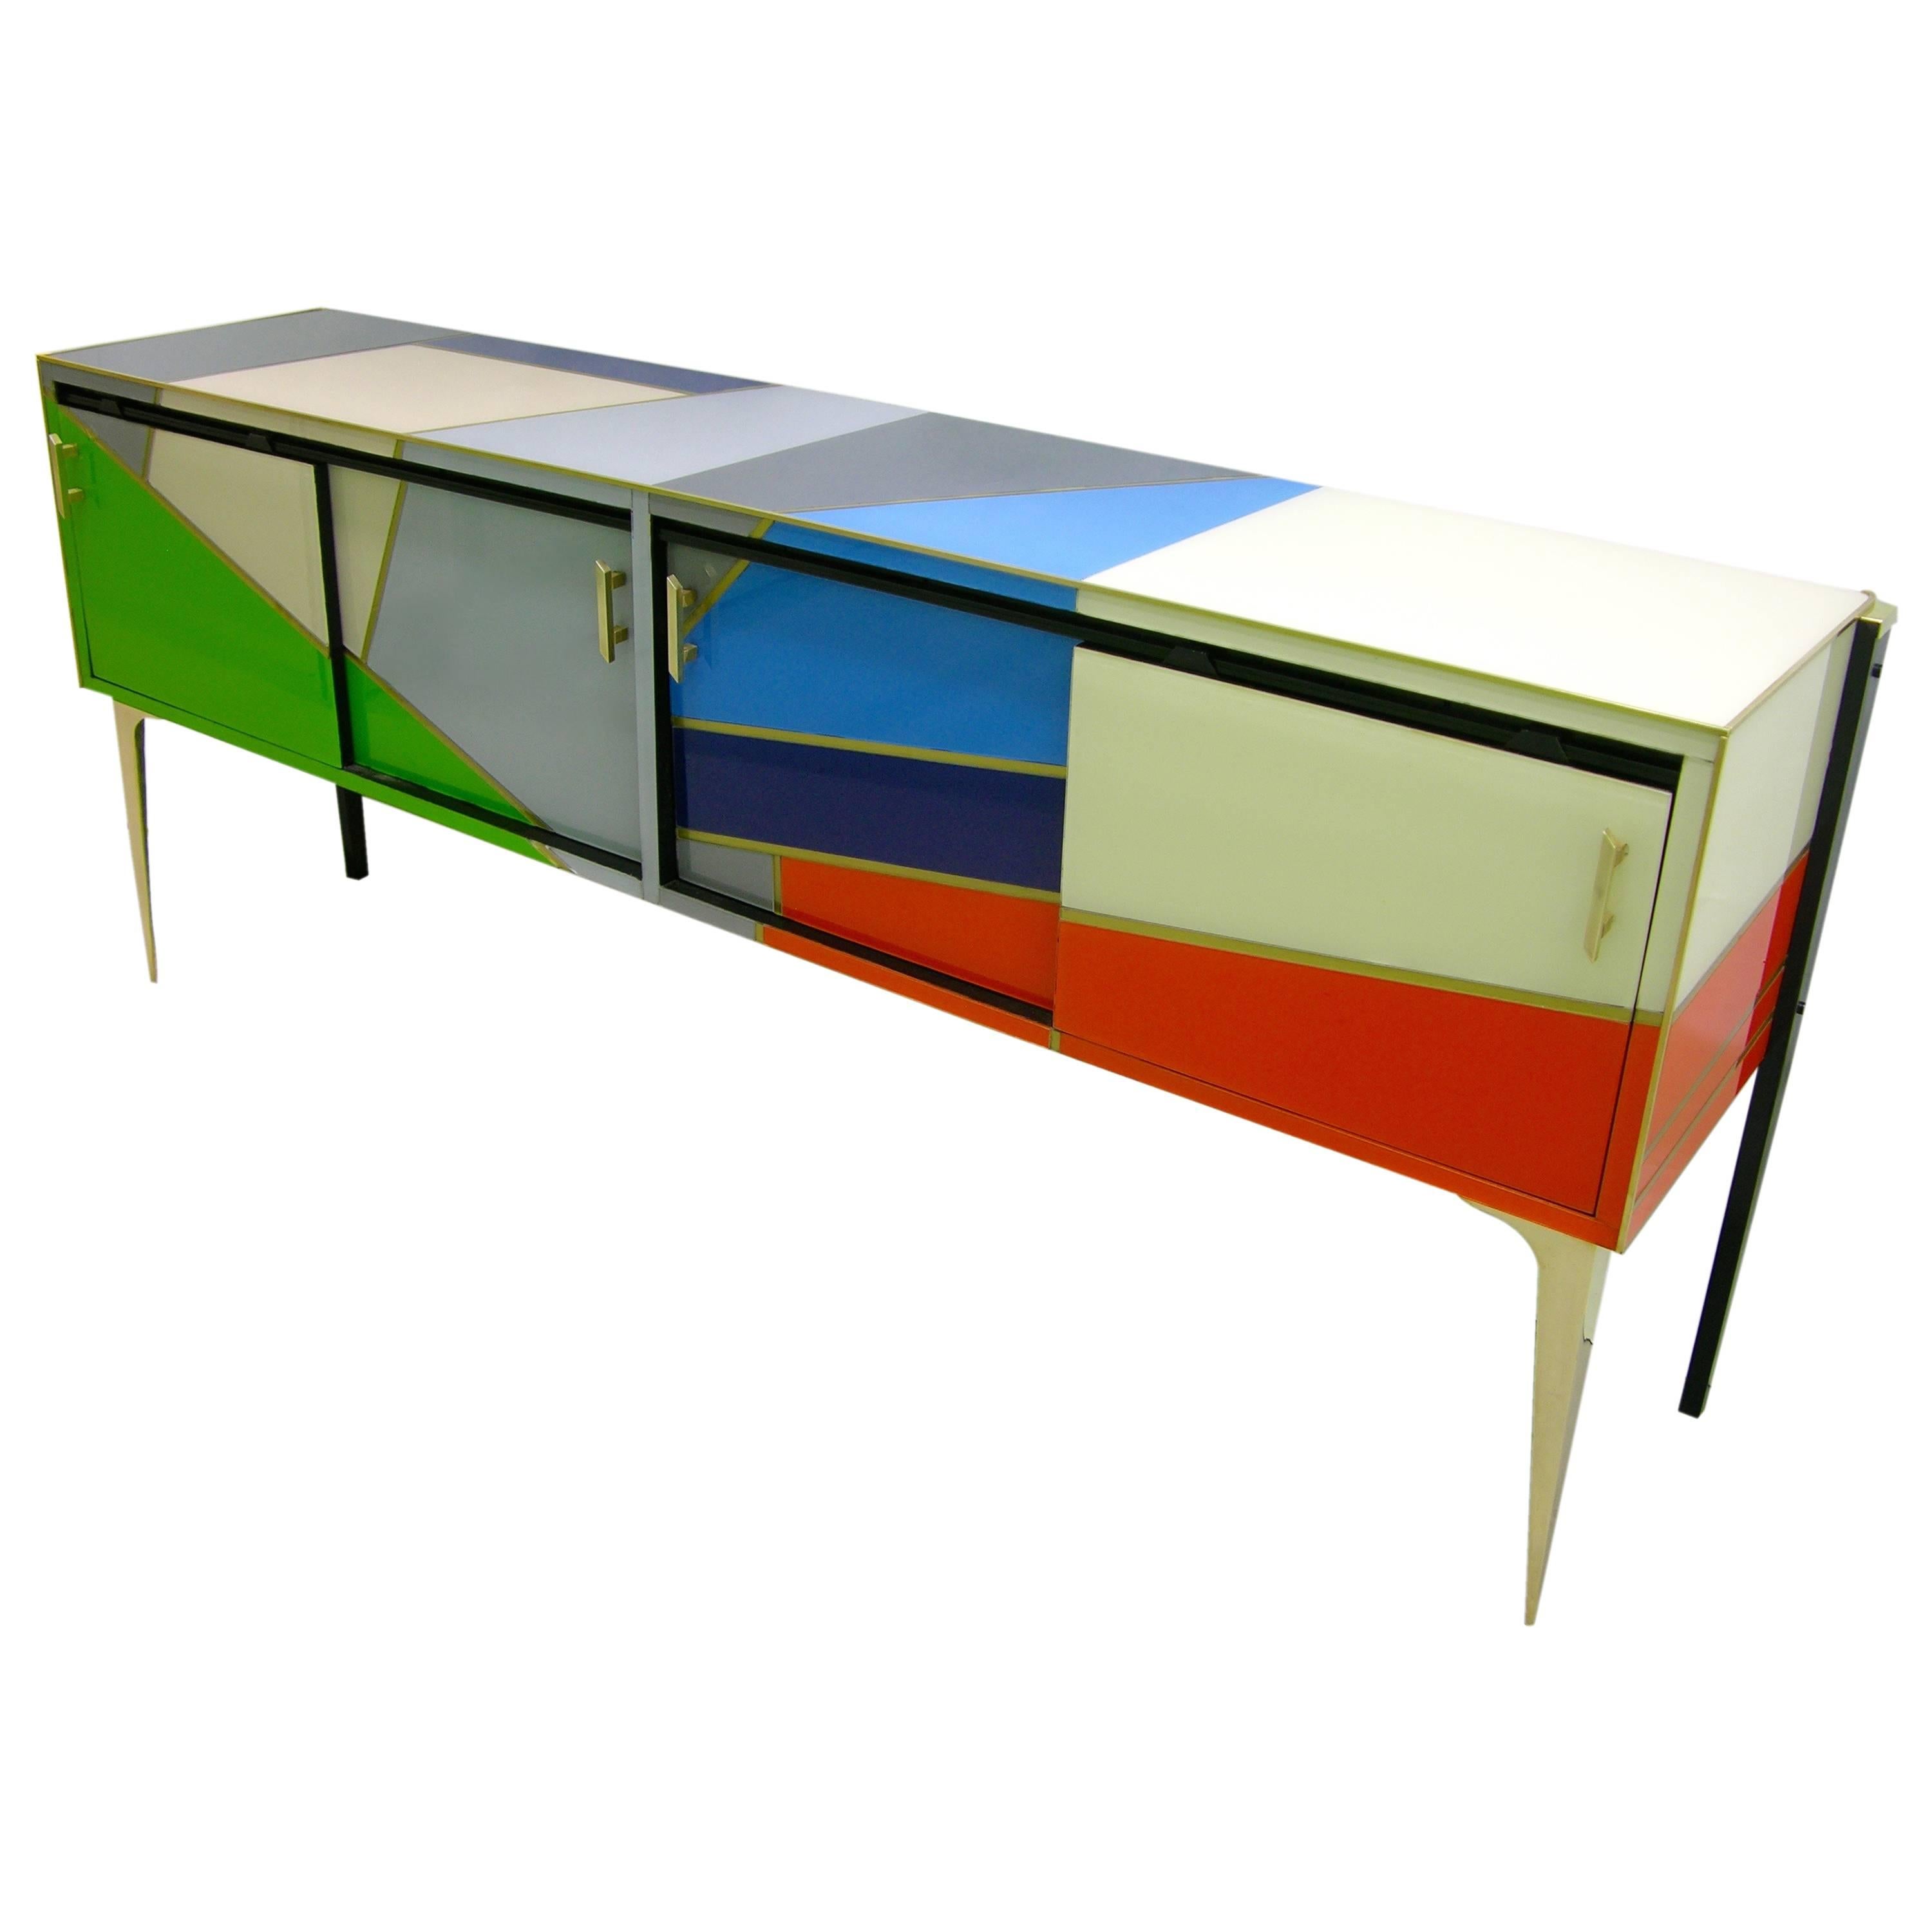 1980 One-of-a-Kind Italian Modern Colored Glass Sideboard with Sliding Doors